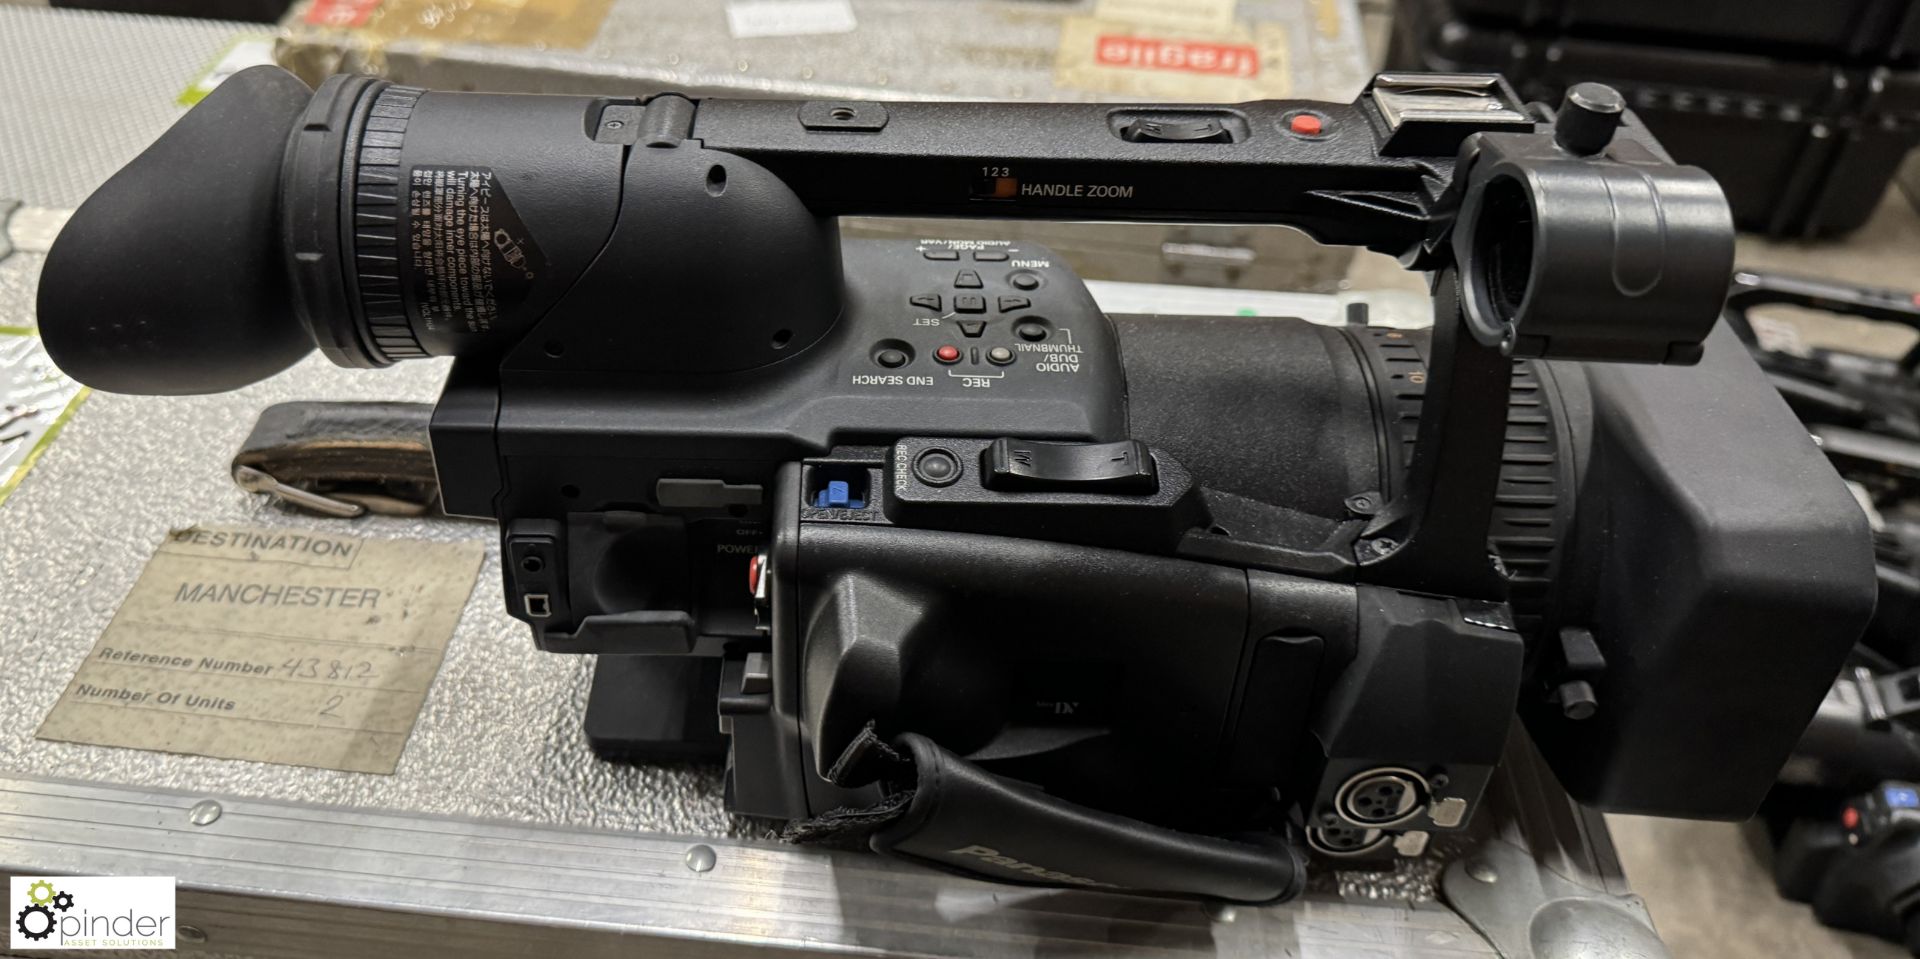 Panasonic Camera Recorder with Leica Dicomar lens and soft case - Image 2 of 5